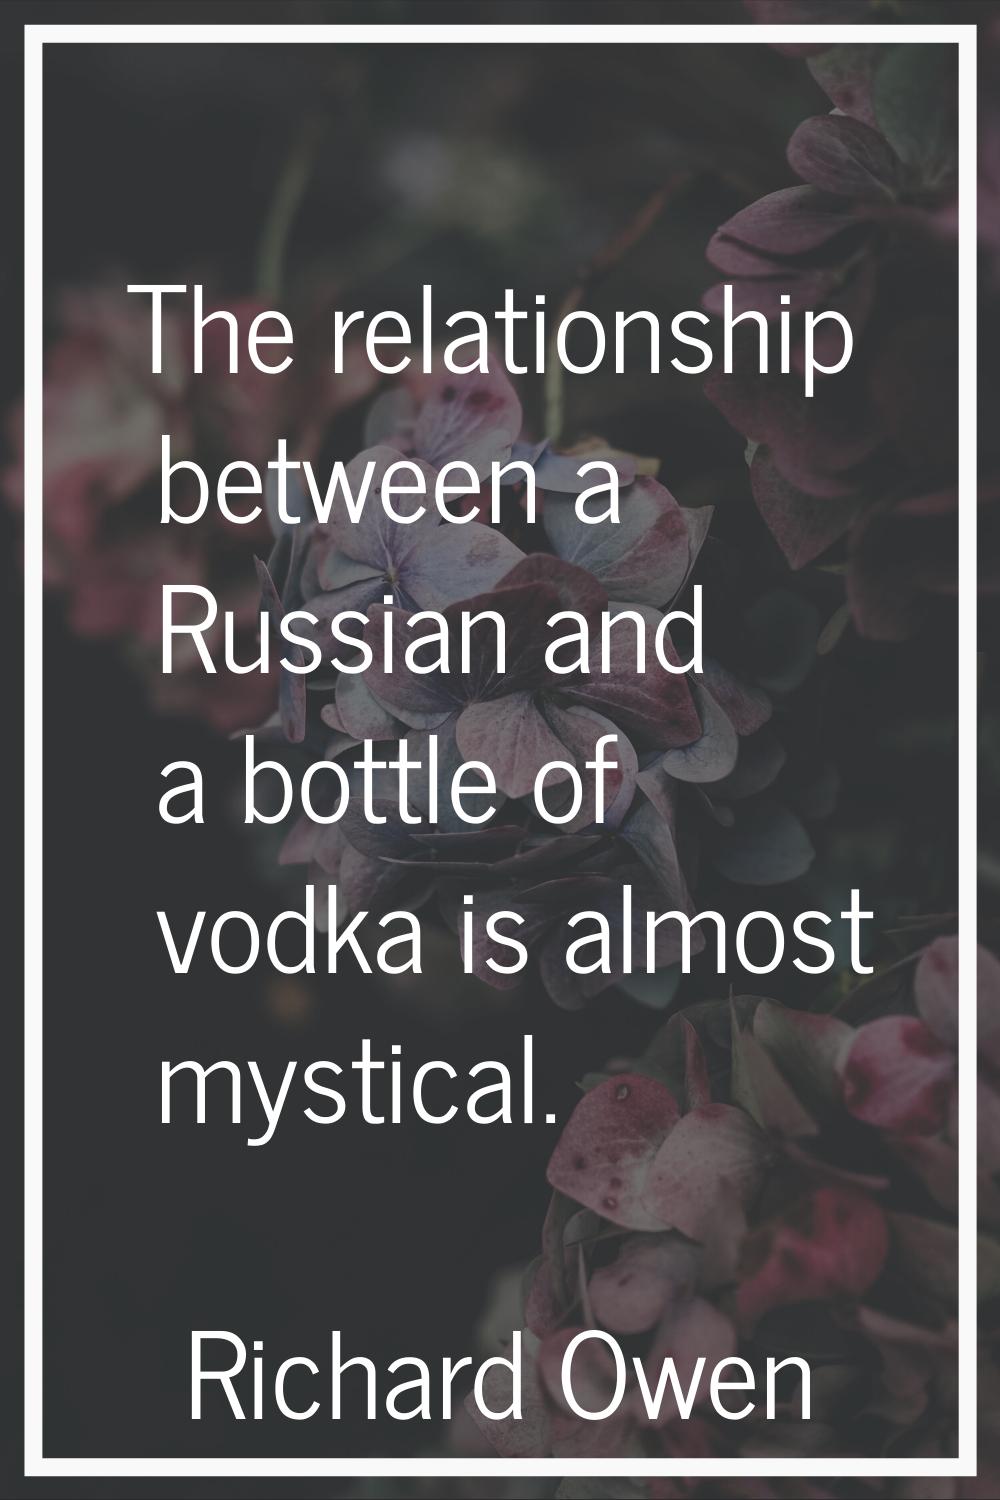 The relationship between a Russian and a bottle of vodka is almost mystical.